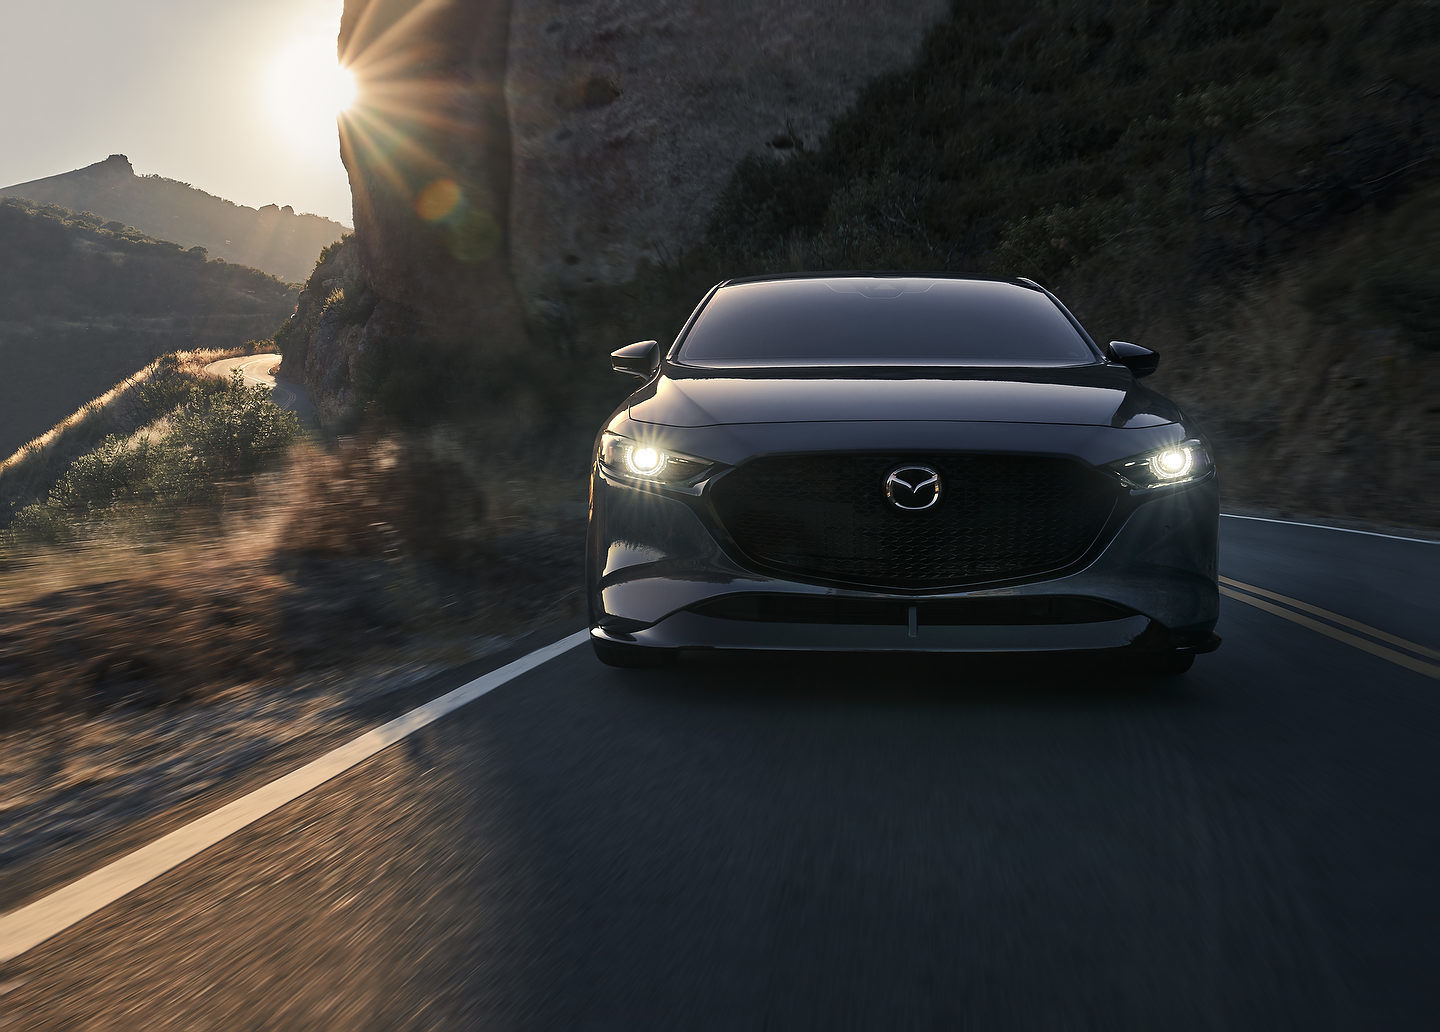 An In-Depth Look at Mazda's G-Vectoring Control and What It Does